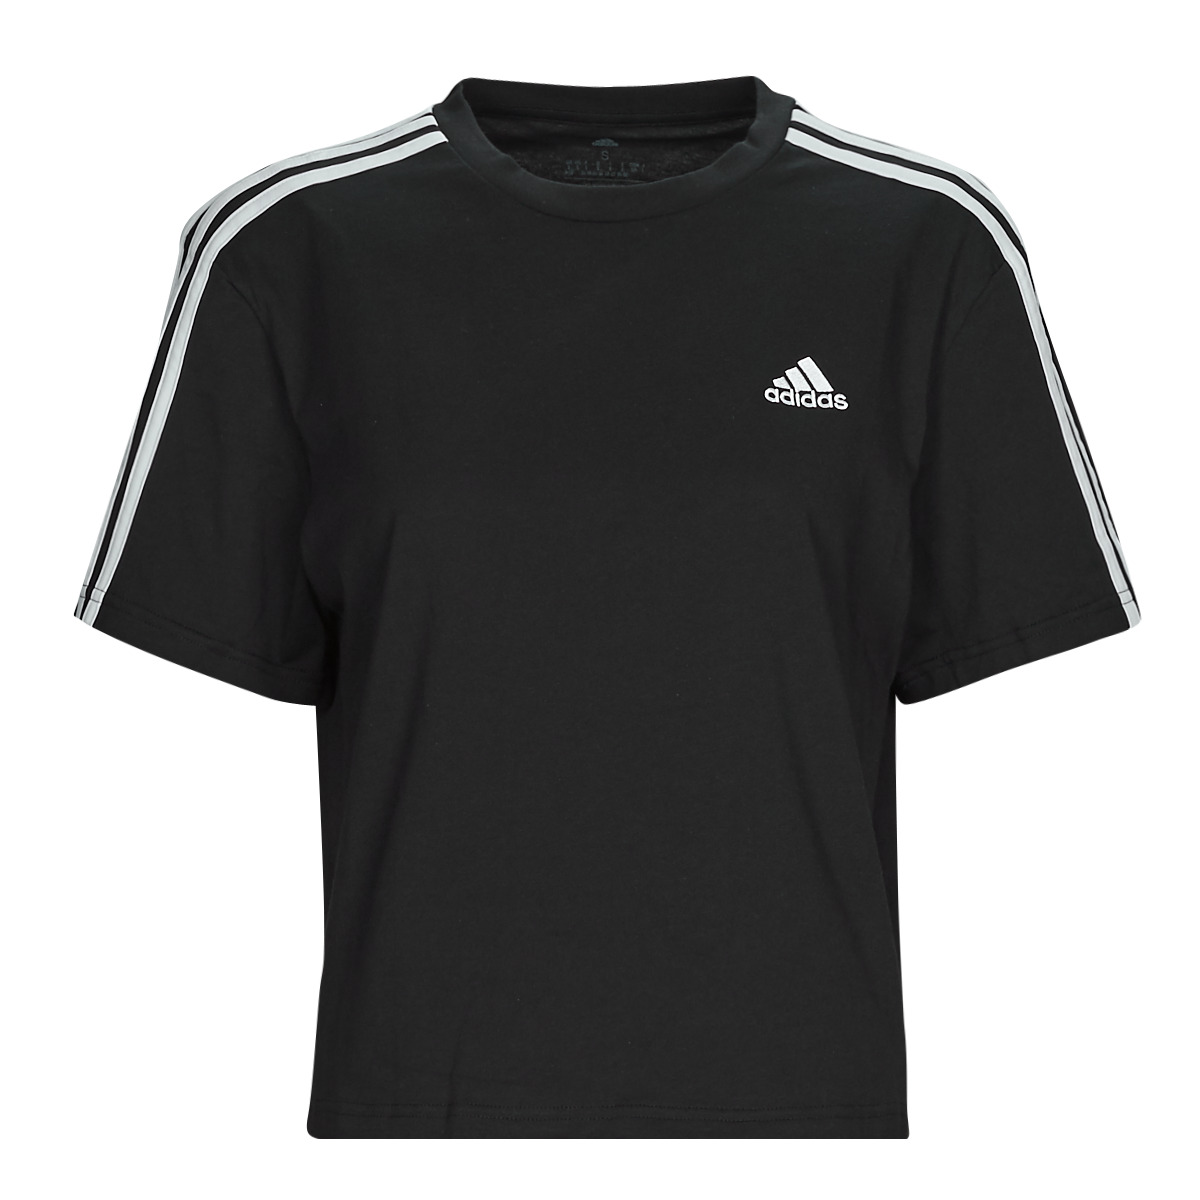 24,80 - € delivery Women t-shirts short-sleeved Black Sportswear ! CR Fast TOP Adidas | Clothing 3S Spartoo Europe -